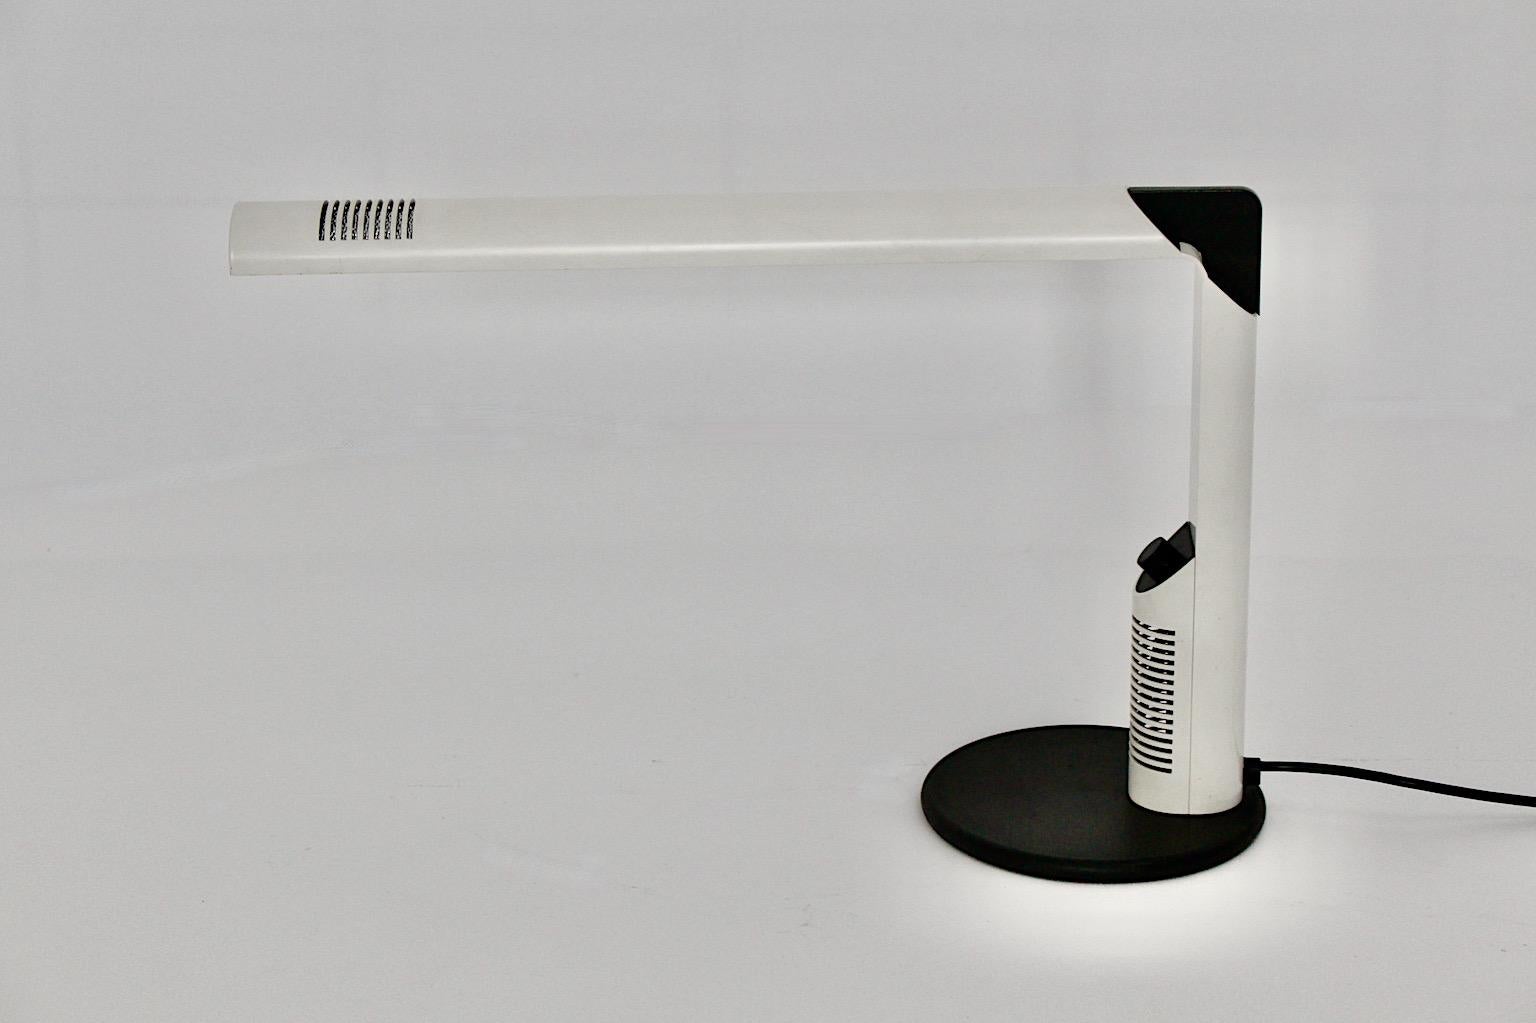 Space Age Vintage White Table Lamp Desk Lamp Gianfranco Frattini, 1970s, Italy For Sale 1